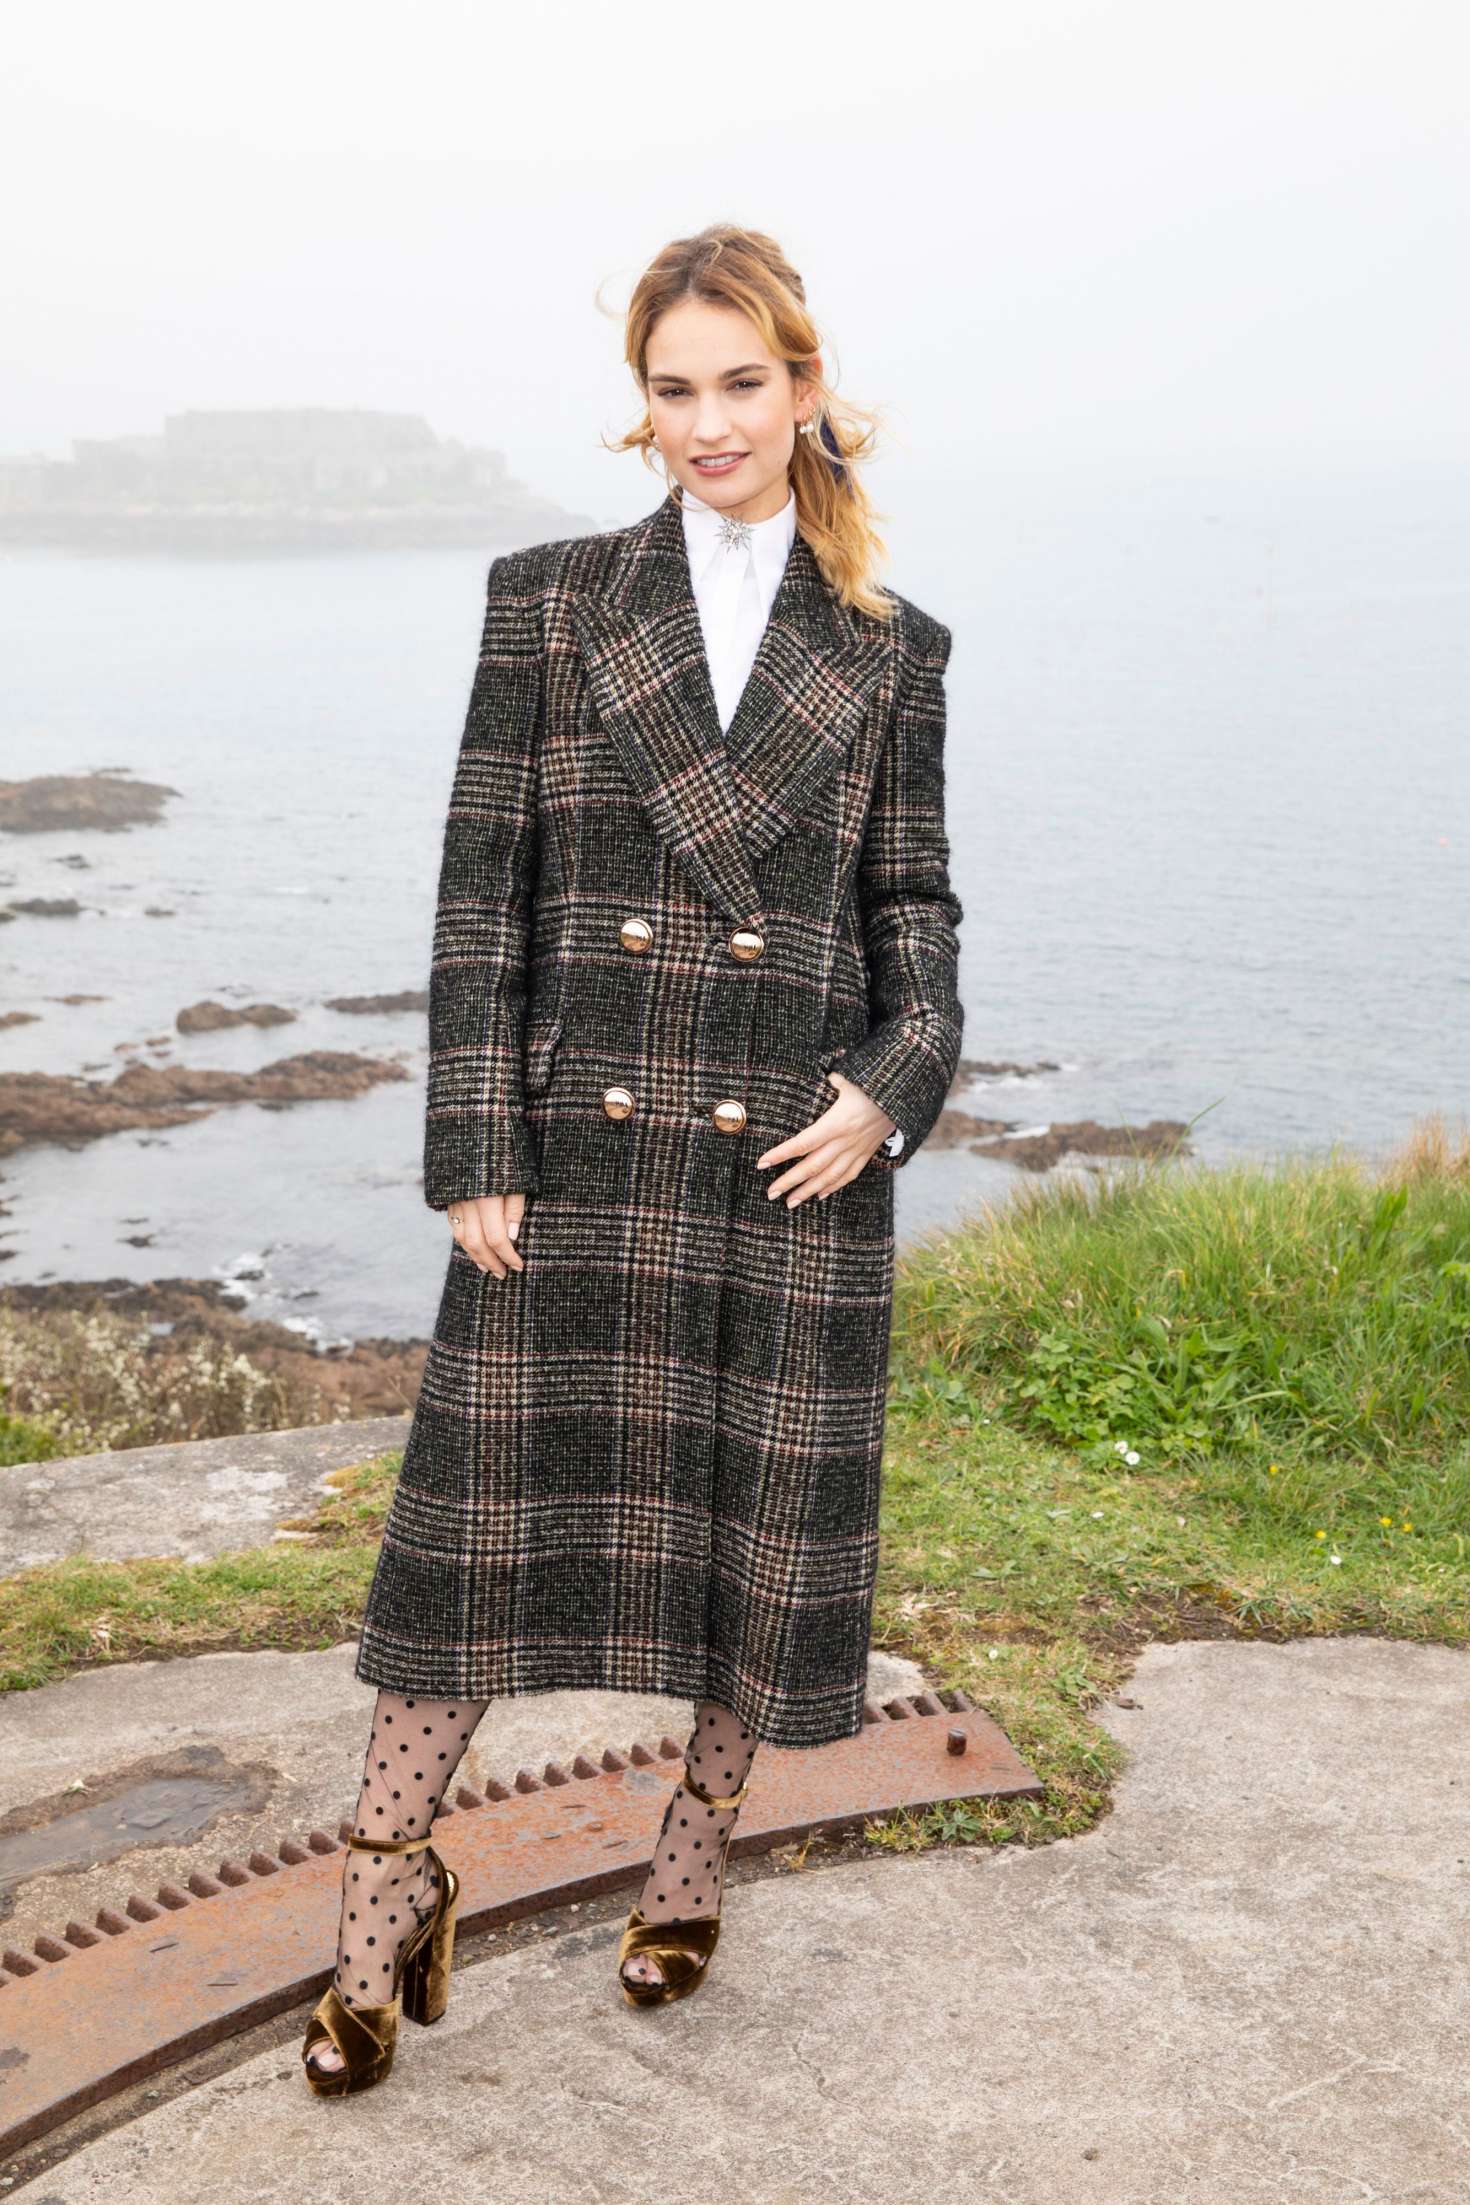 Lily James 2018 : Lily James: The Guernsey Literary and Potato Peel Pie Society Photocall -10